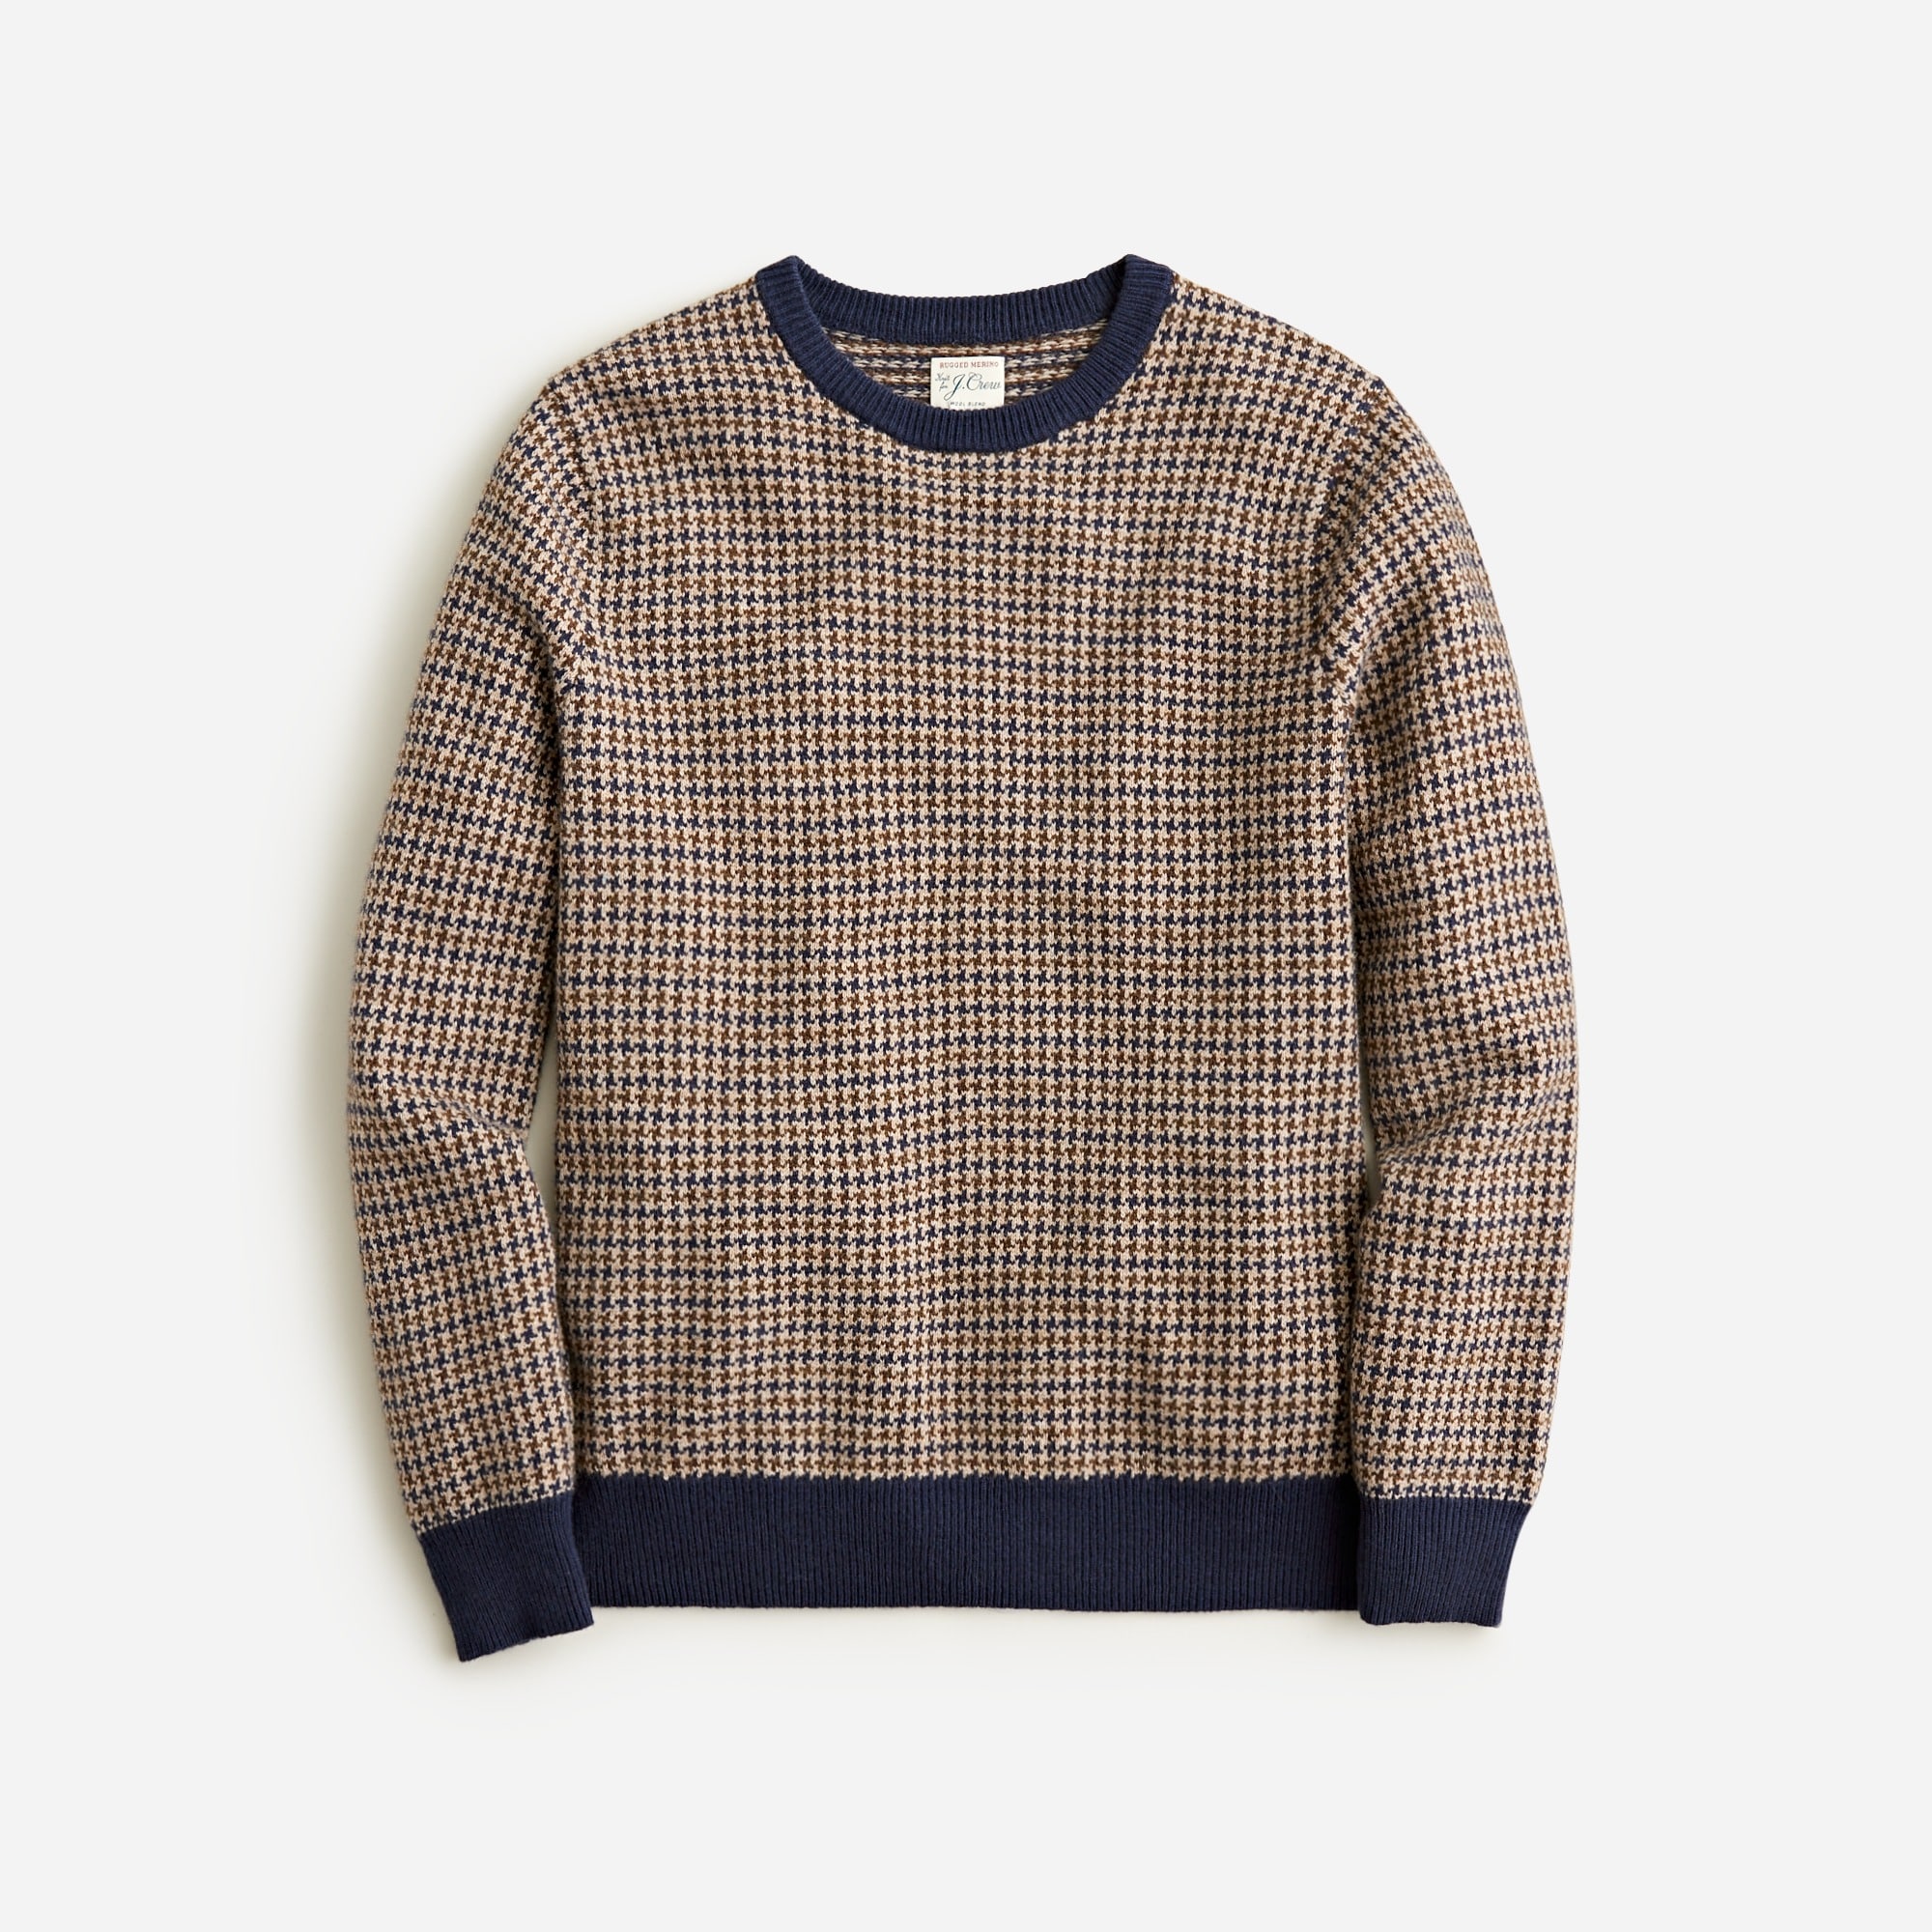  Merino wool-blend sweater in houndstooth jacquard